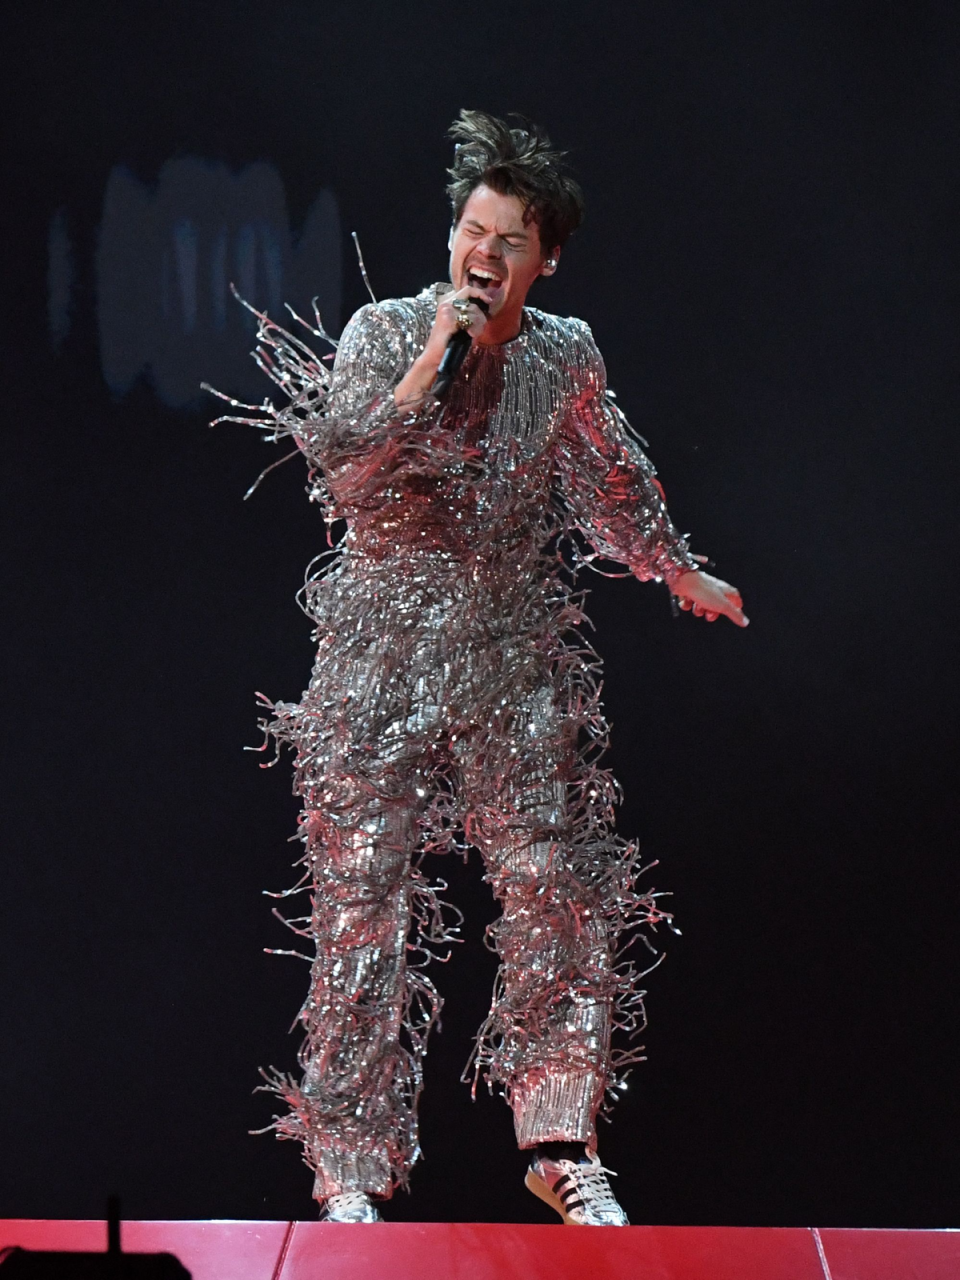 Harry Styles performs on stage during the 65th Annual Grammy Awards, February 5, 2023 (AFP/Getty Images)